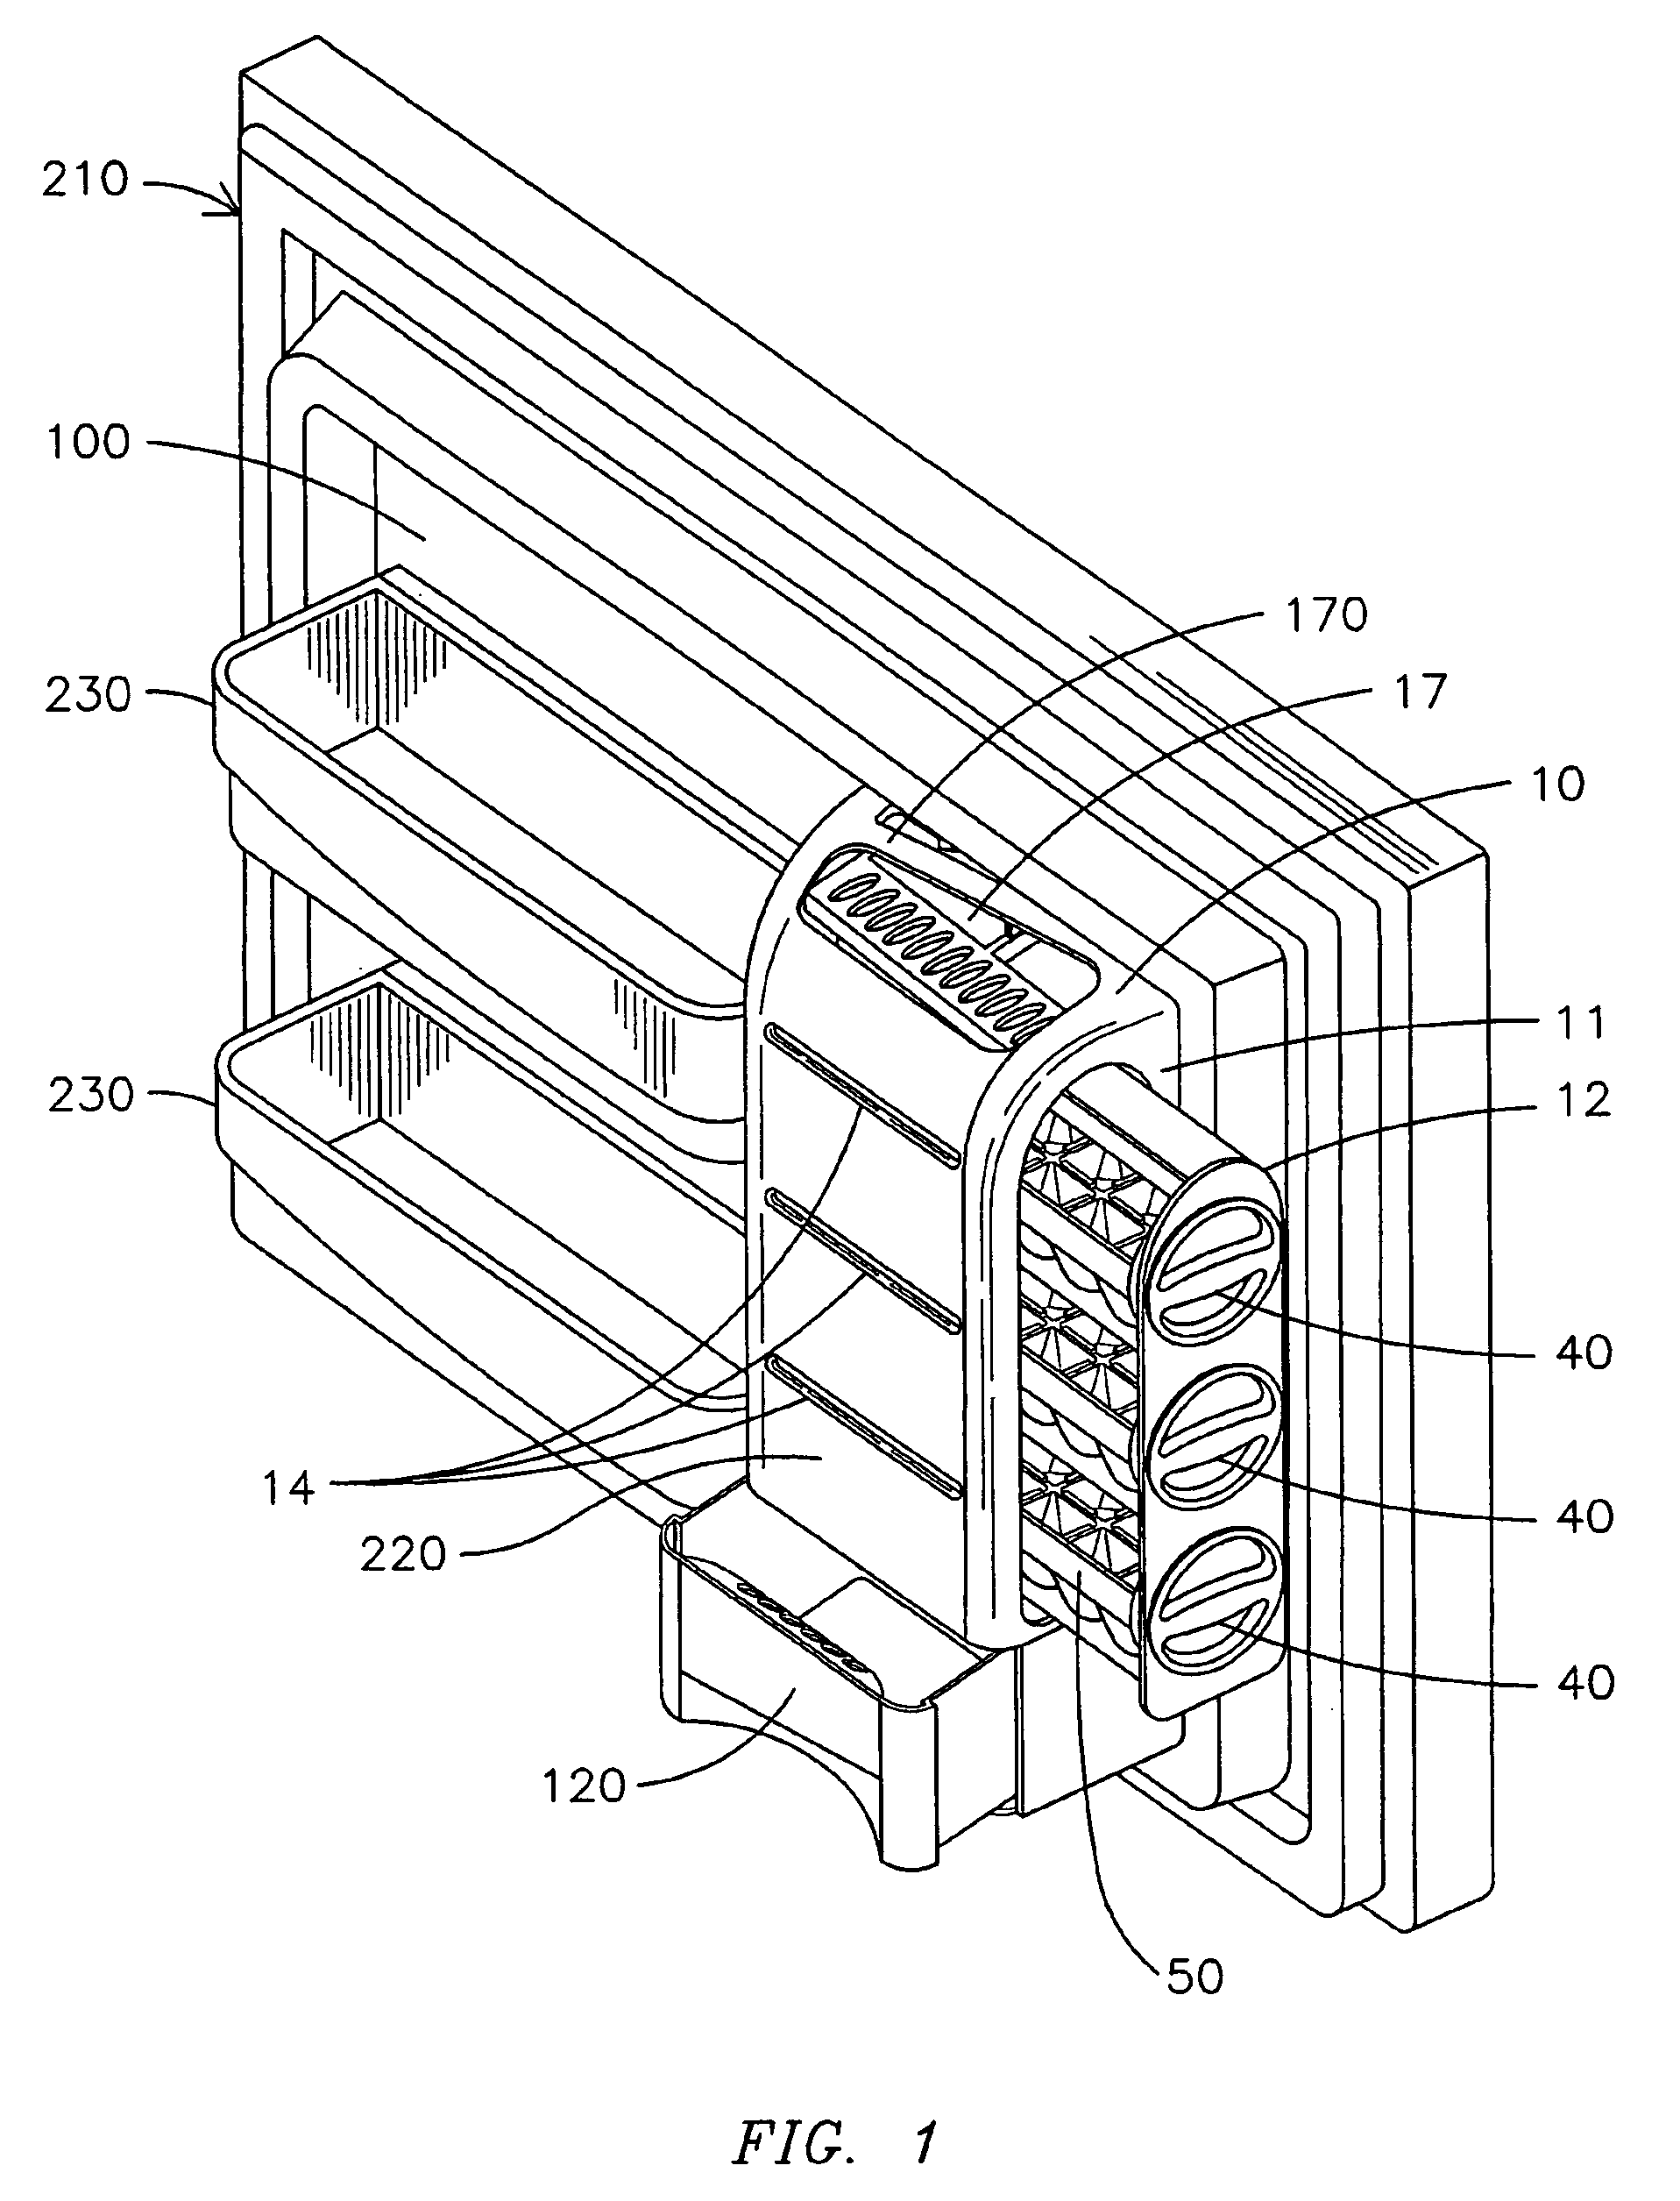 Ice cube making device for refrigerators